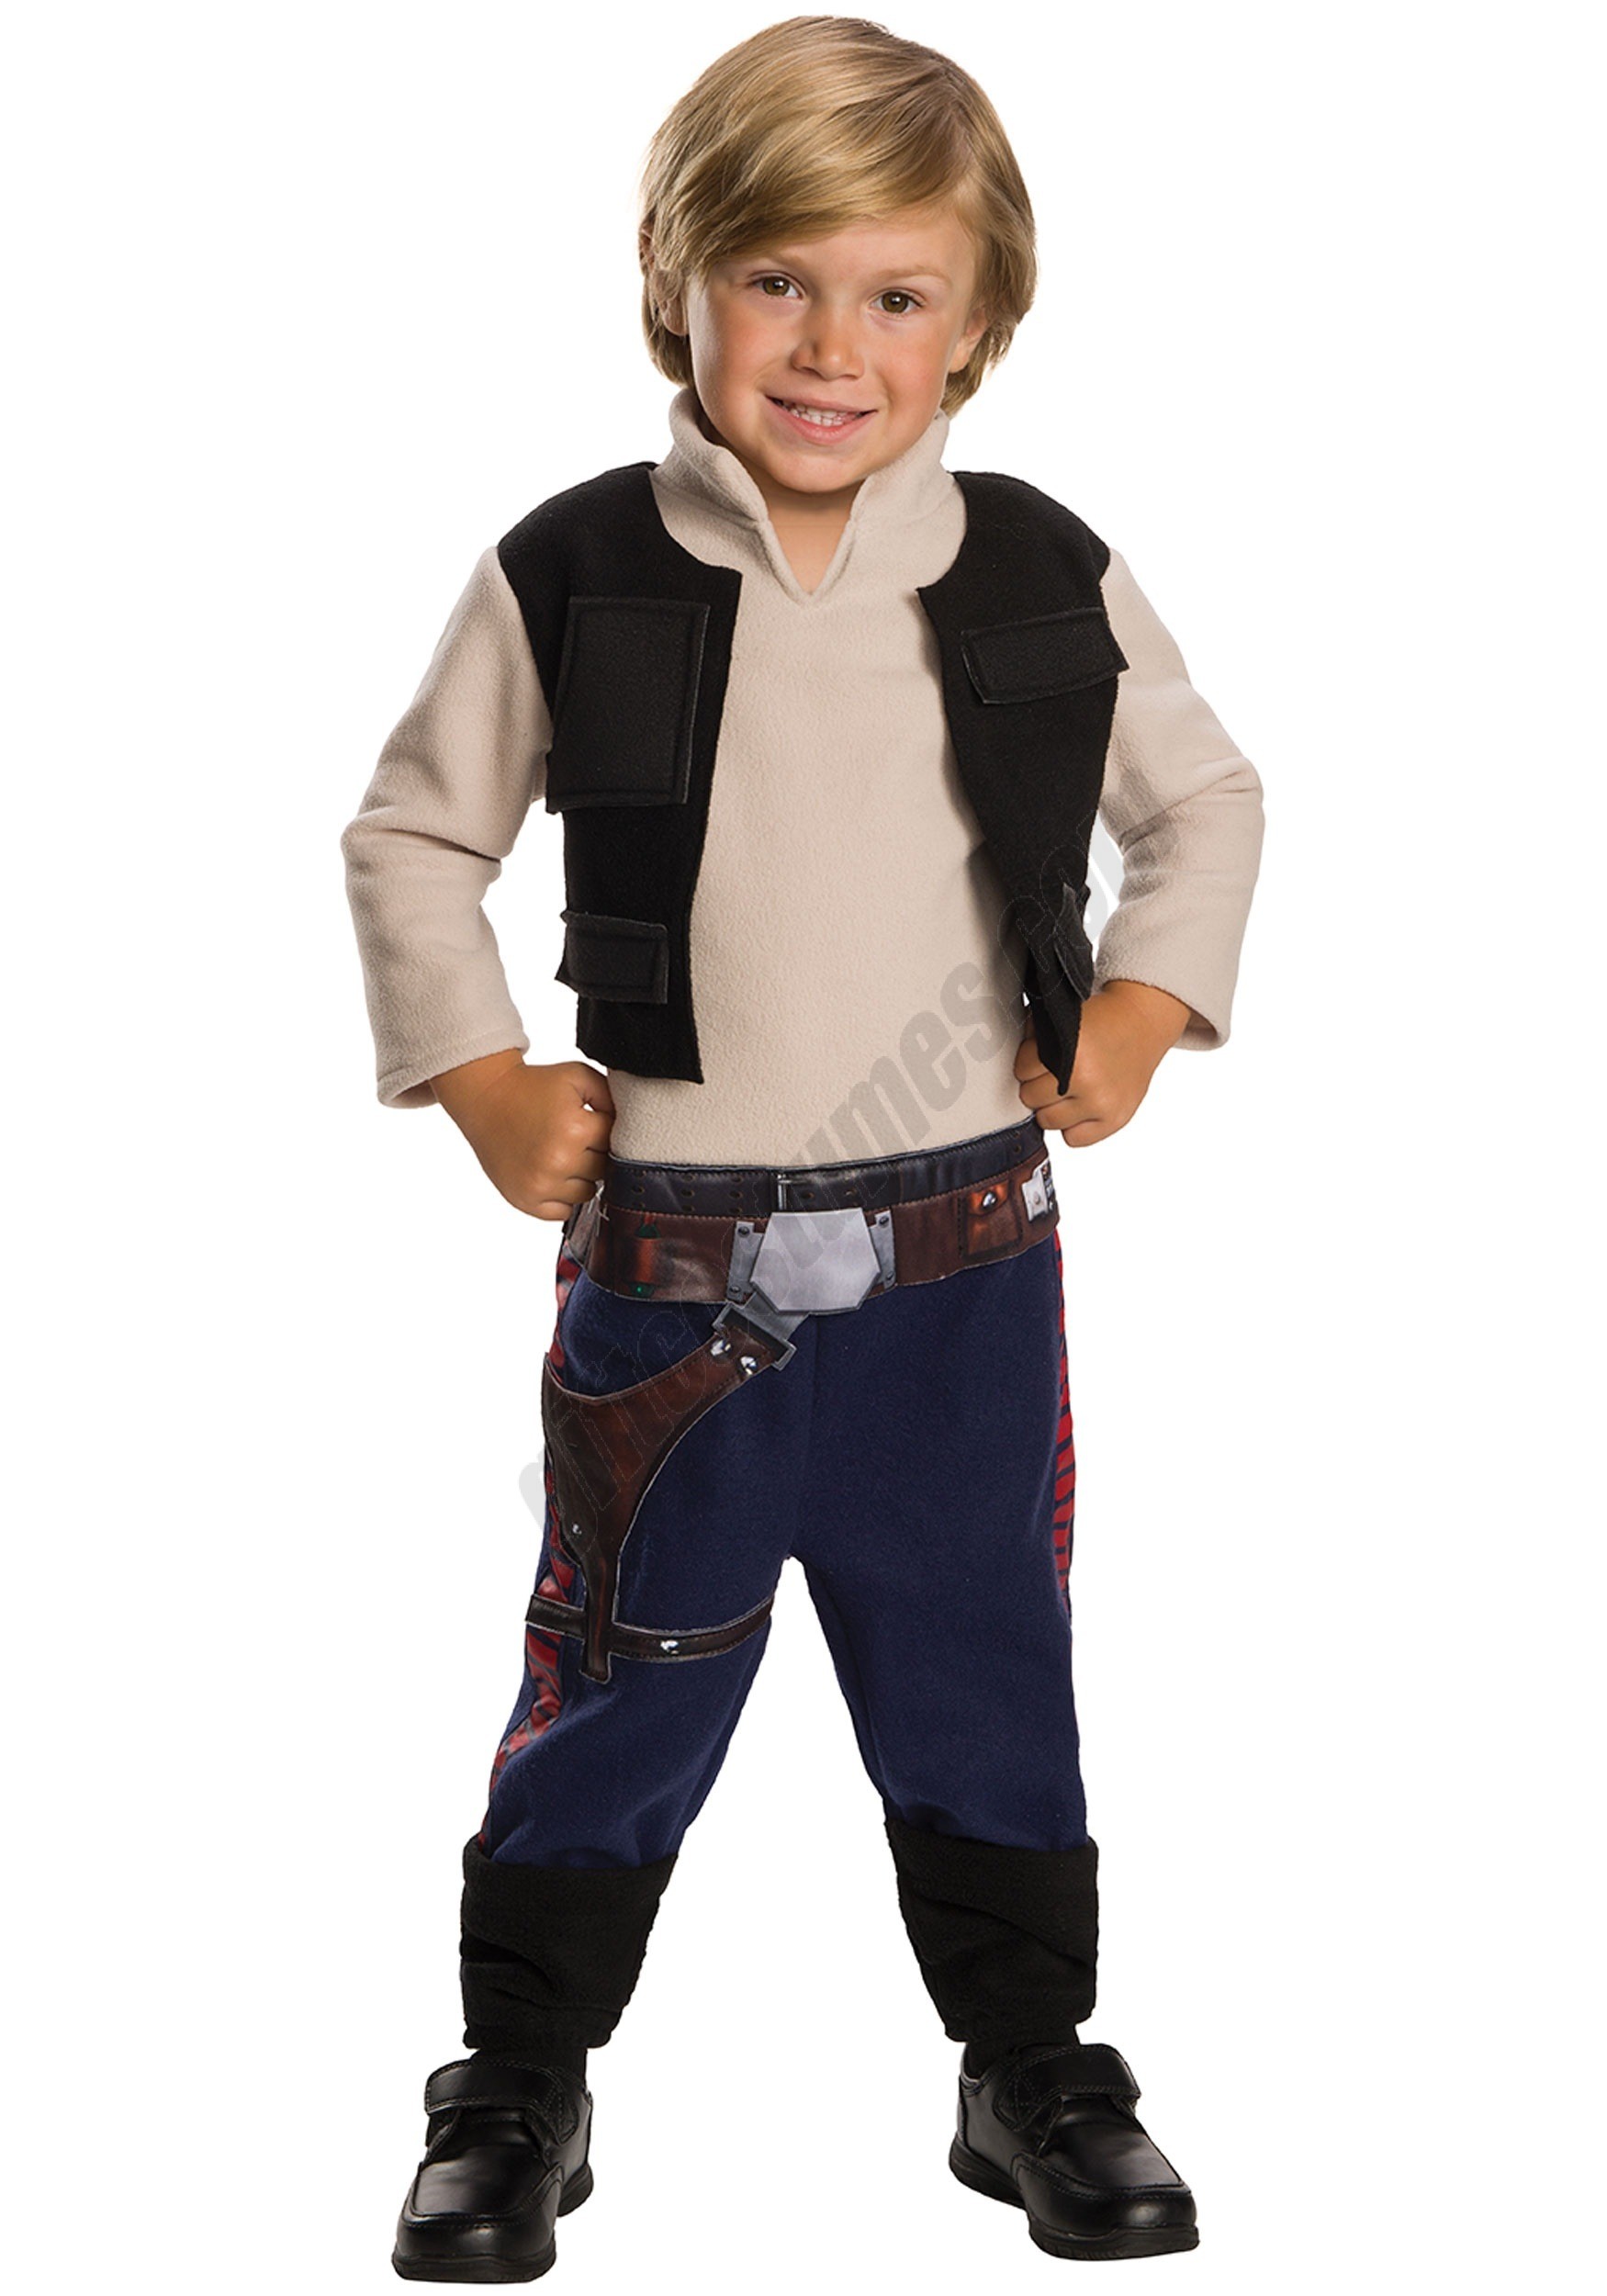 Toddler Han Solo Costume Promotions - Toddler Han Solo Costume Promotions